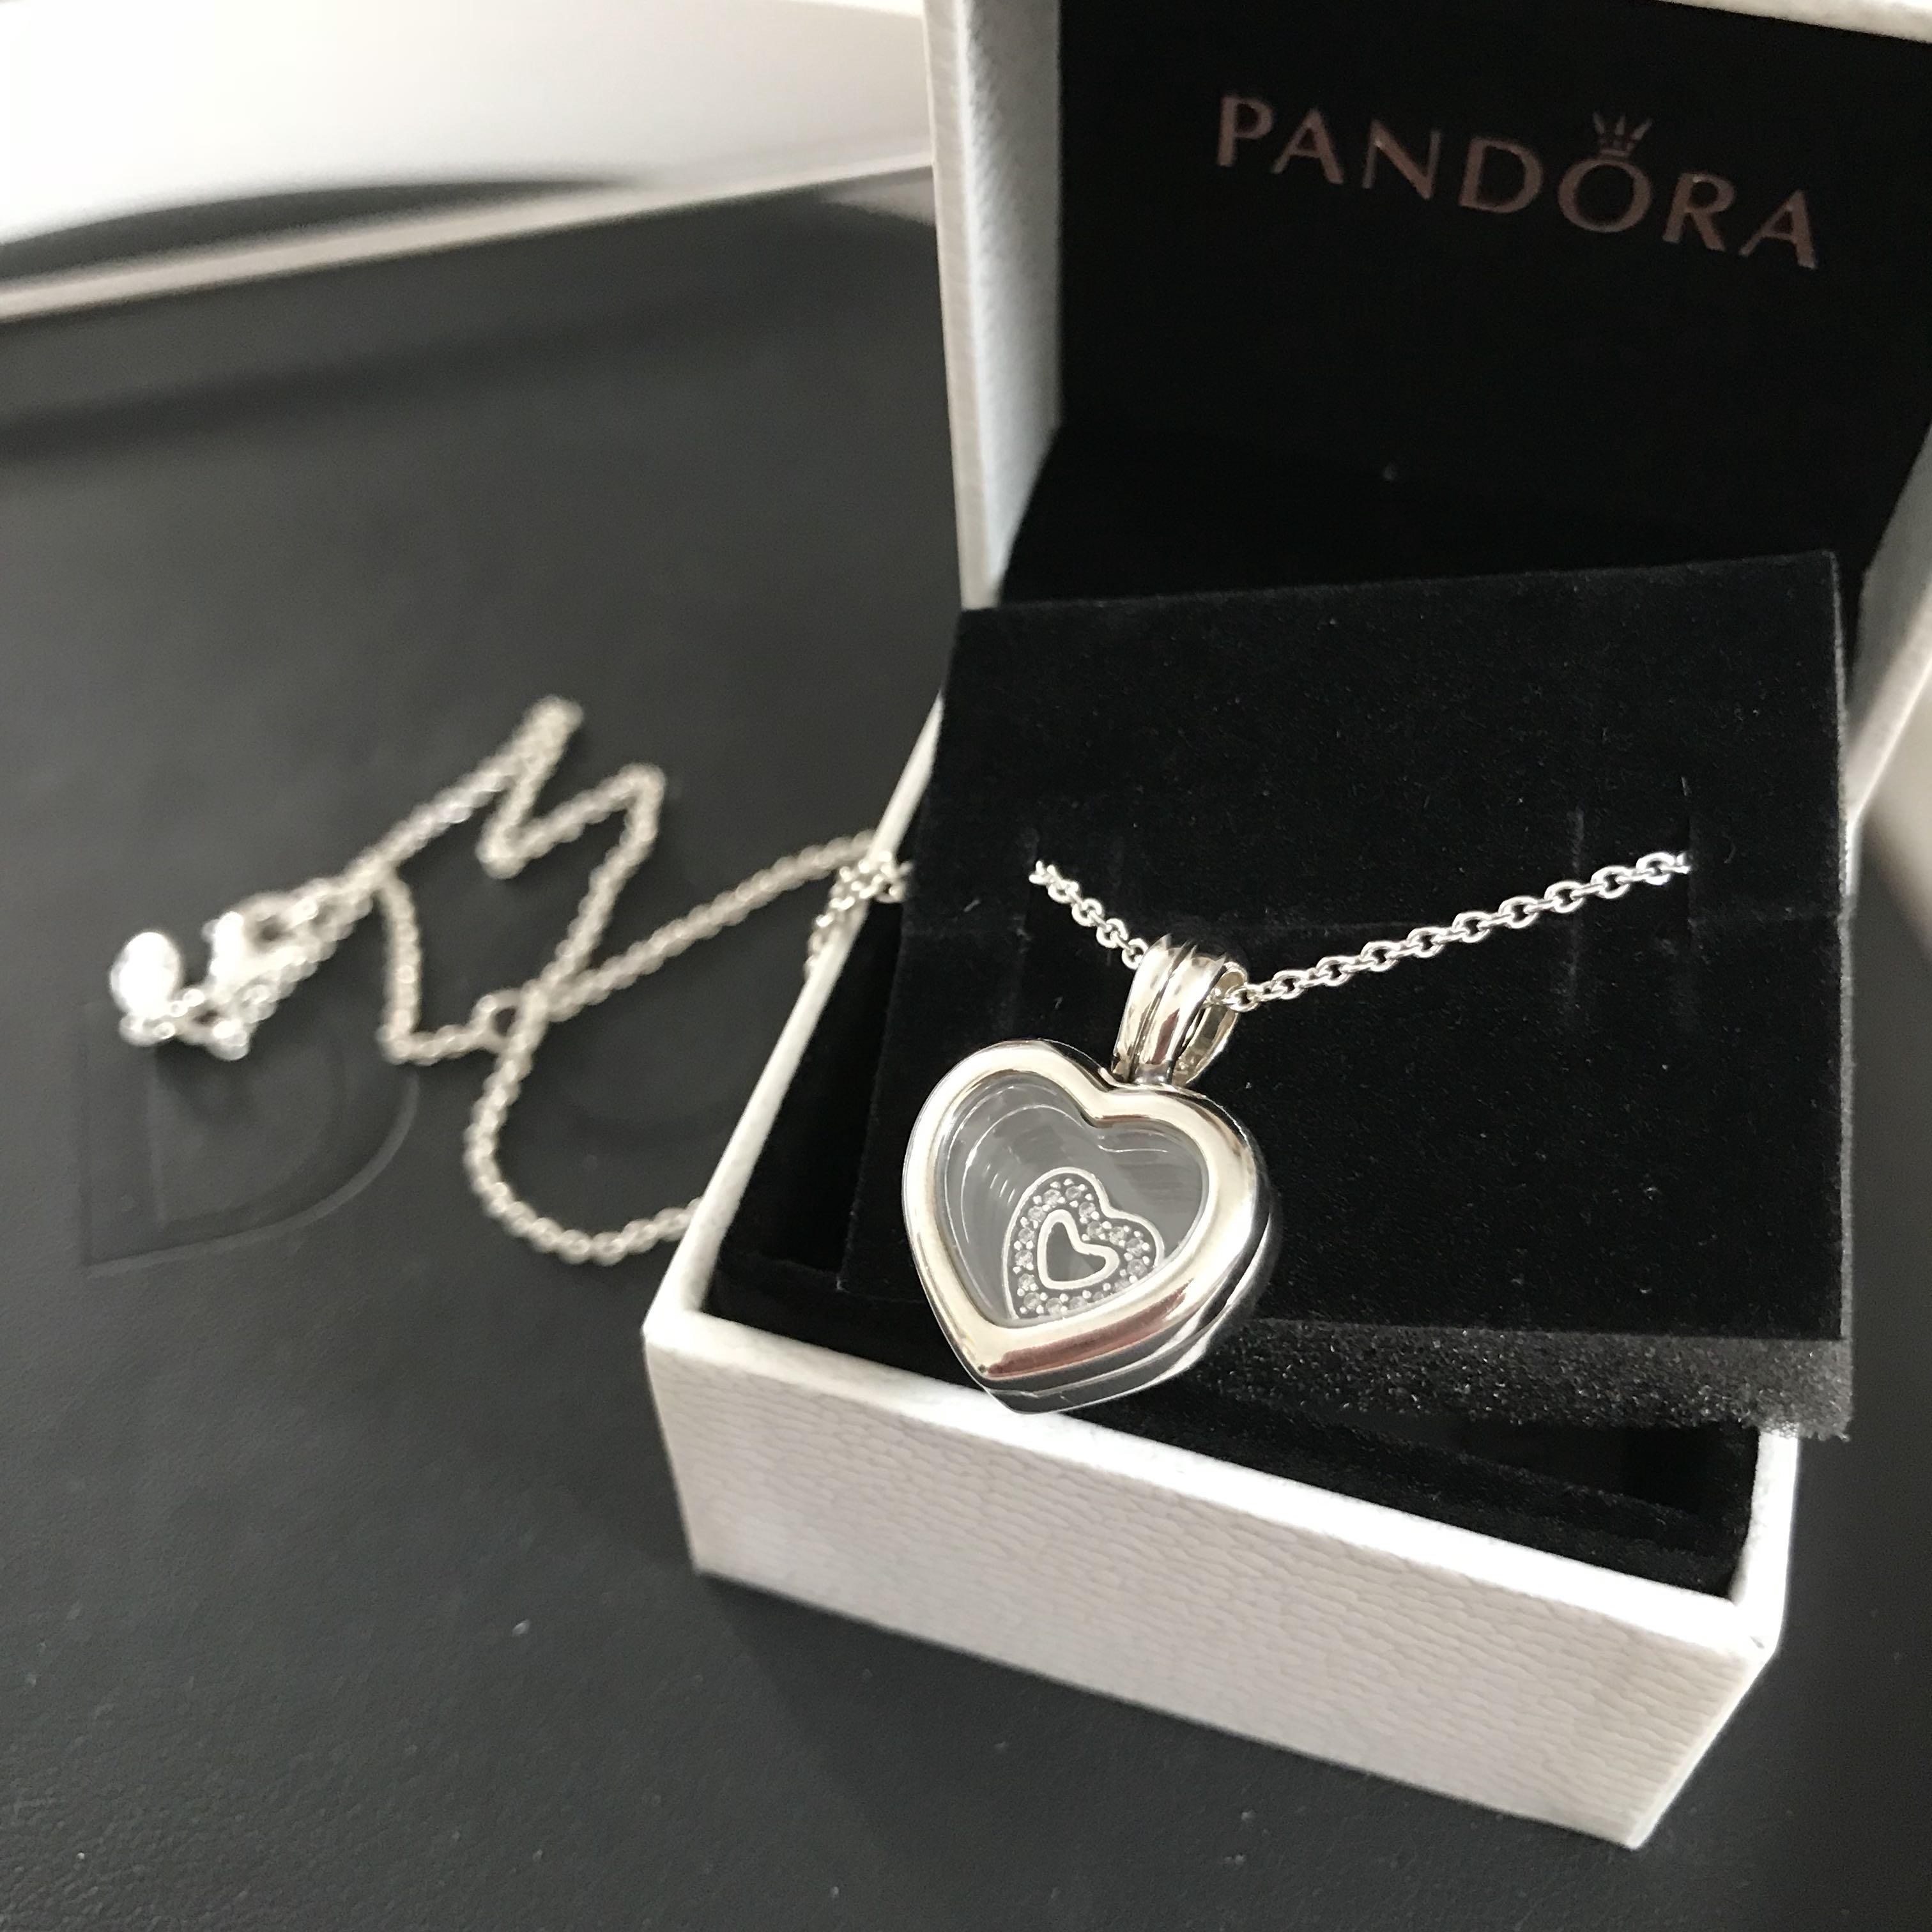 Pandora - The new PANDORA Floating Heart Lockets give you another way to  shape your story and wear it close to your heart. Personalise the lockets  with heart-shaped back plates and petite